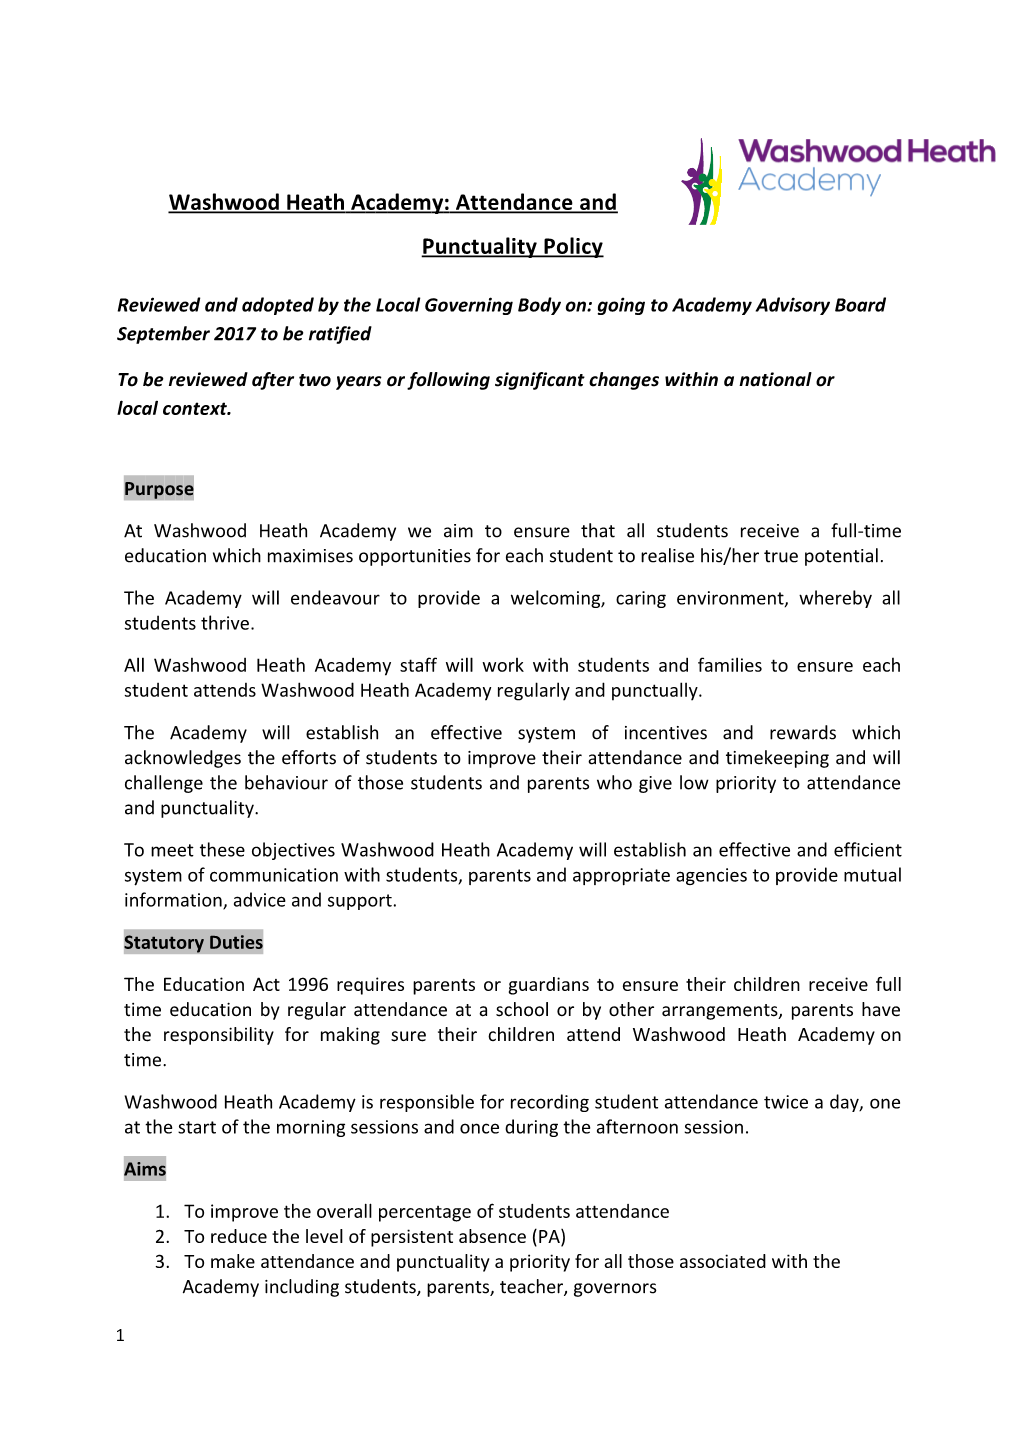 Washwood Heathacademy: Attendance and Punctuality Policy